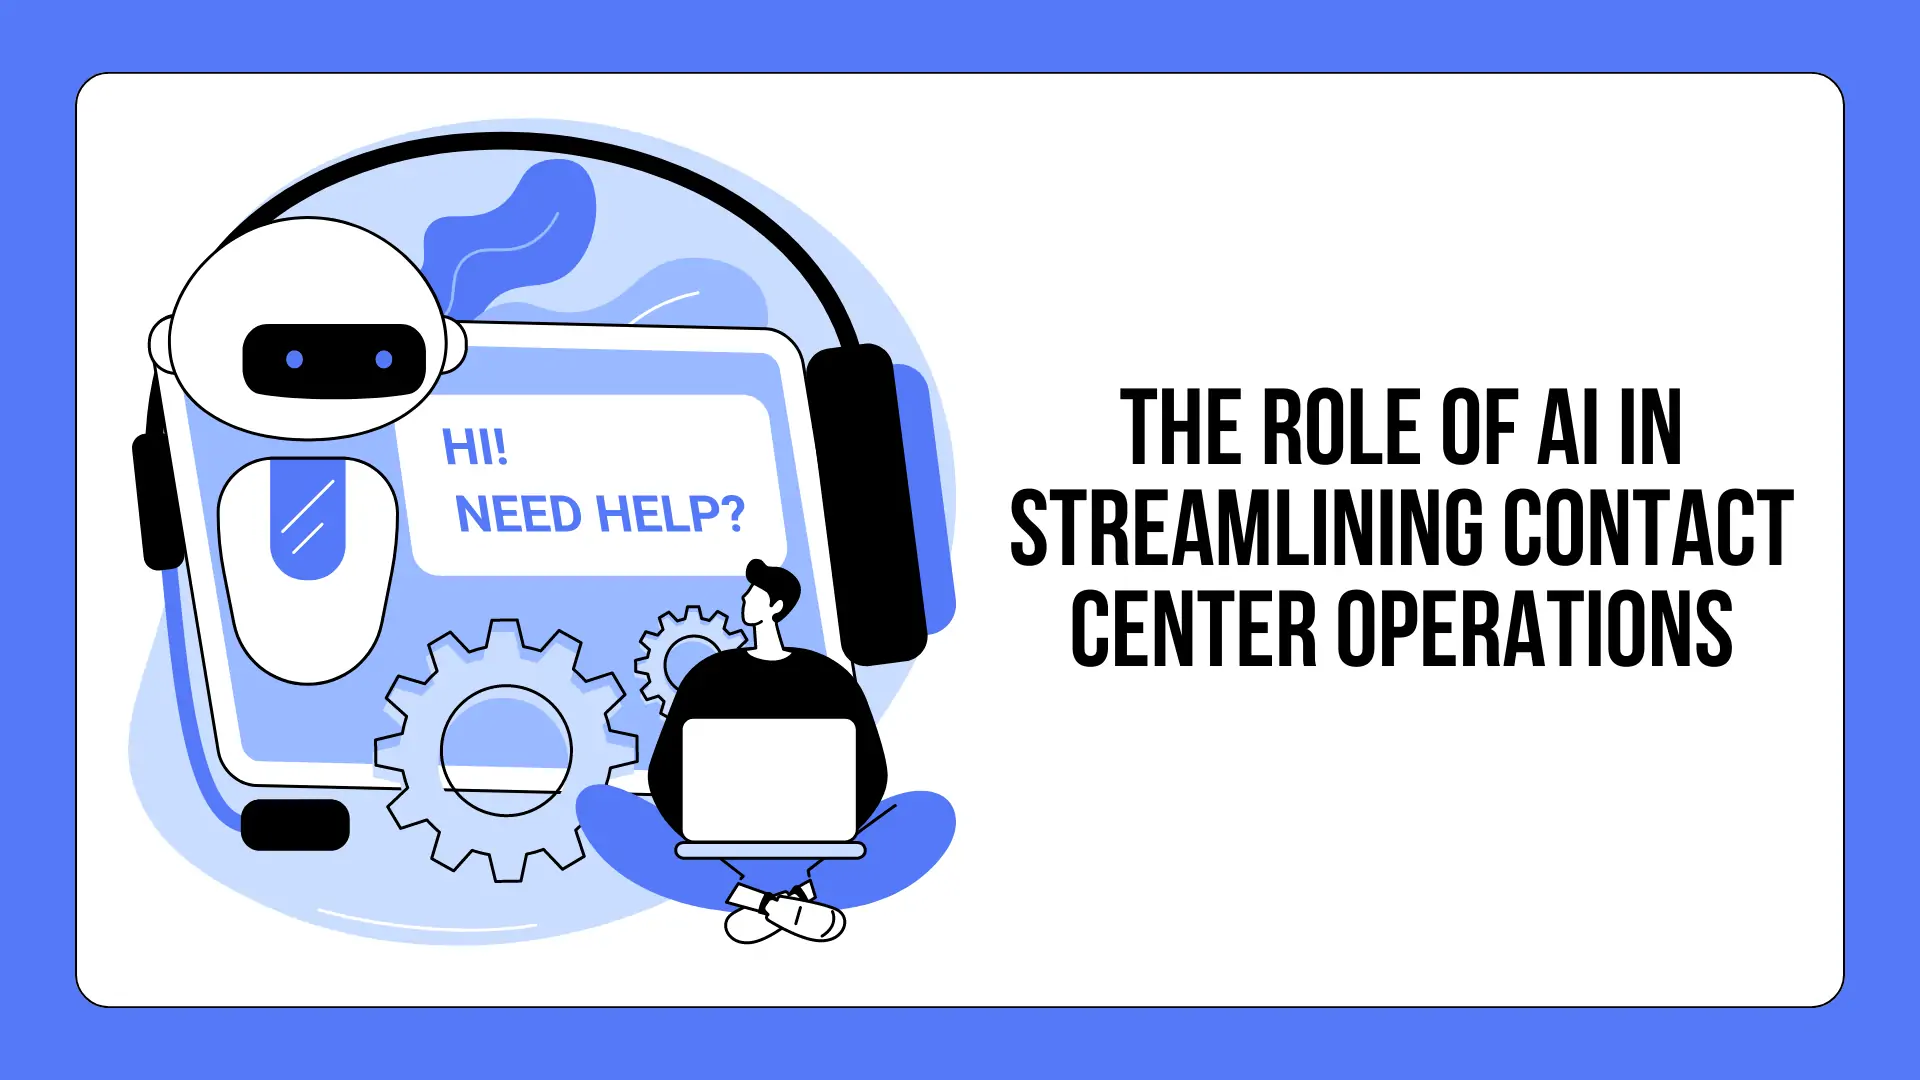 The Role of AI in Streamlining Contact Center Operations